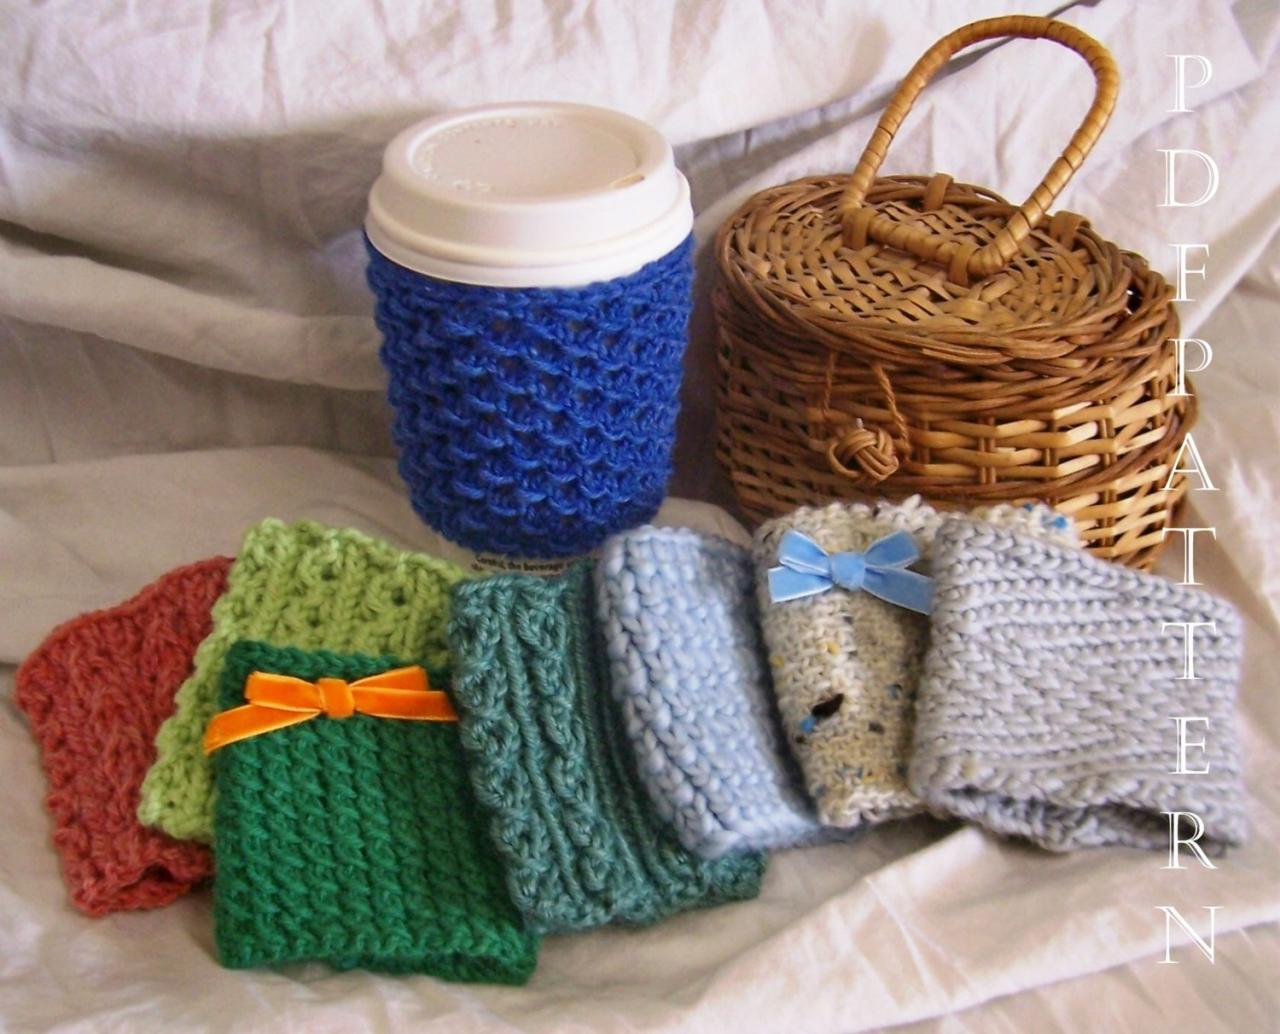 8 Cup Cuddler Instant Download Pdf Knitting Patterns - Series Iii